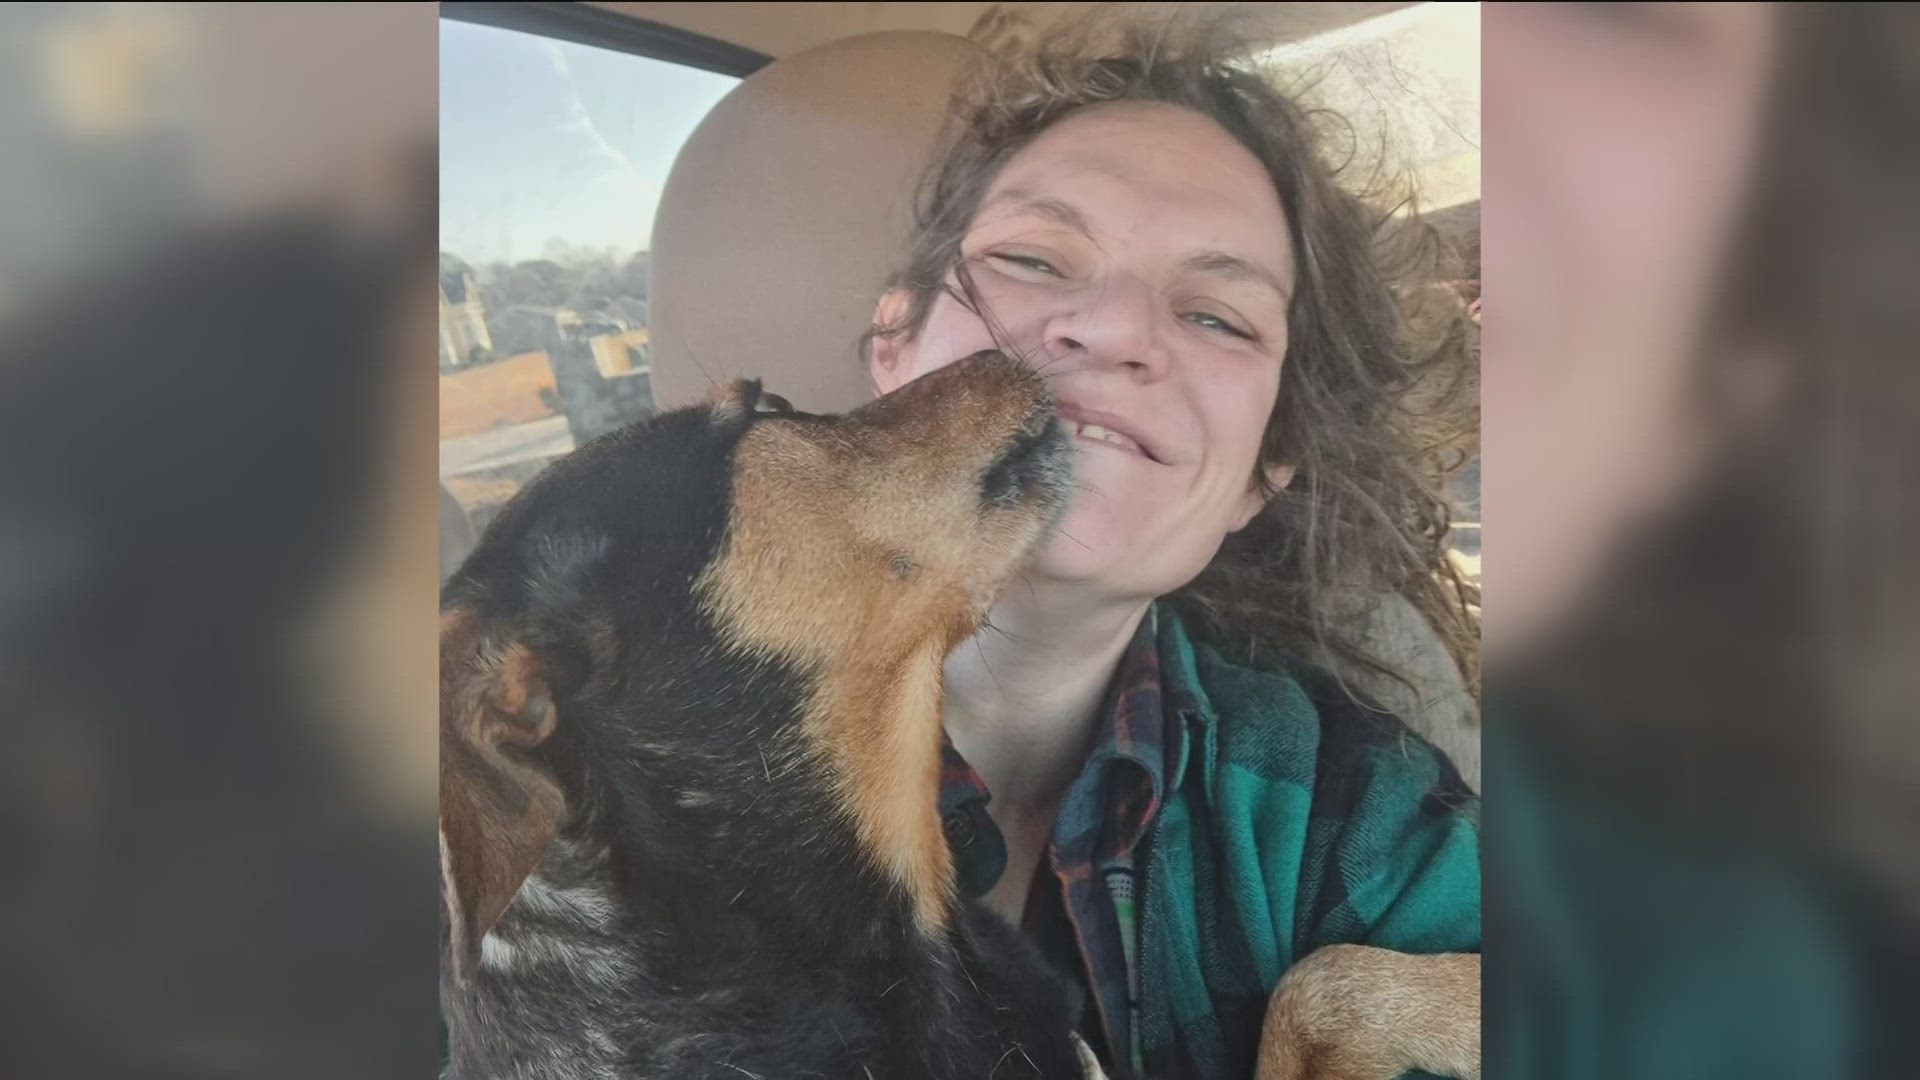 After seven days, six airports, hundreds of tips, and a trip to North Carolina, a Eureka Springs woman and her dog have been reunited.